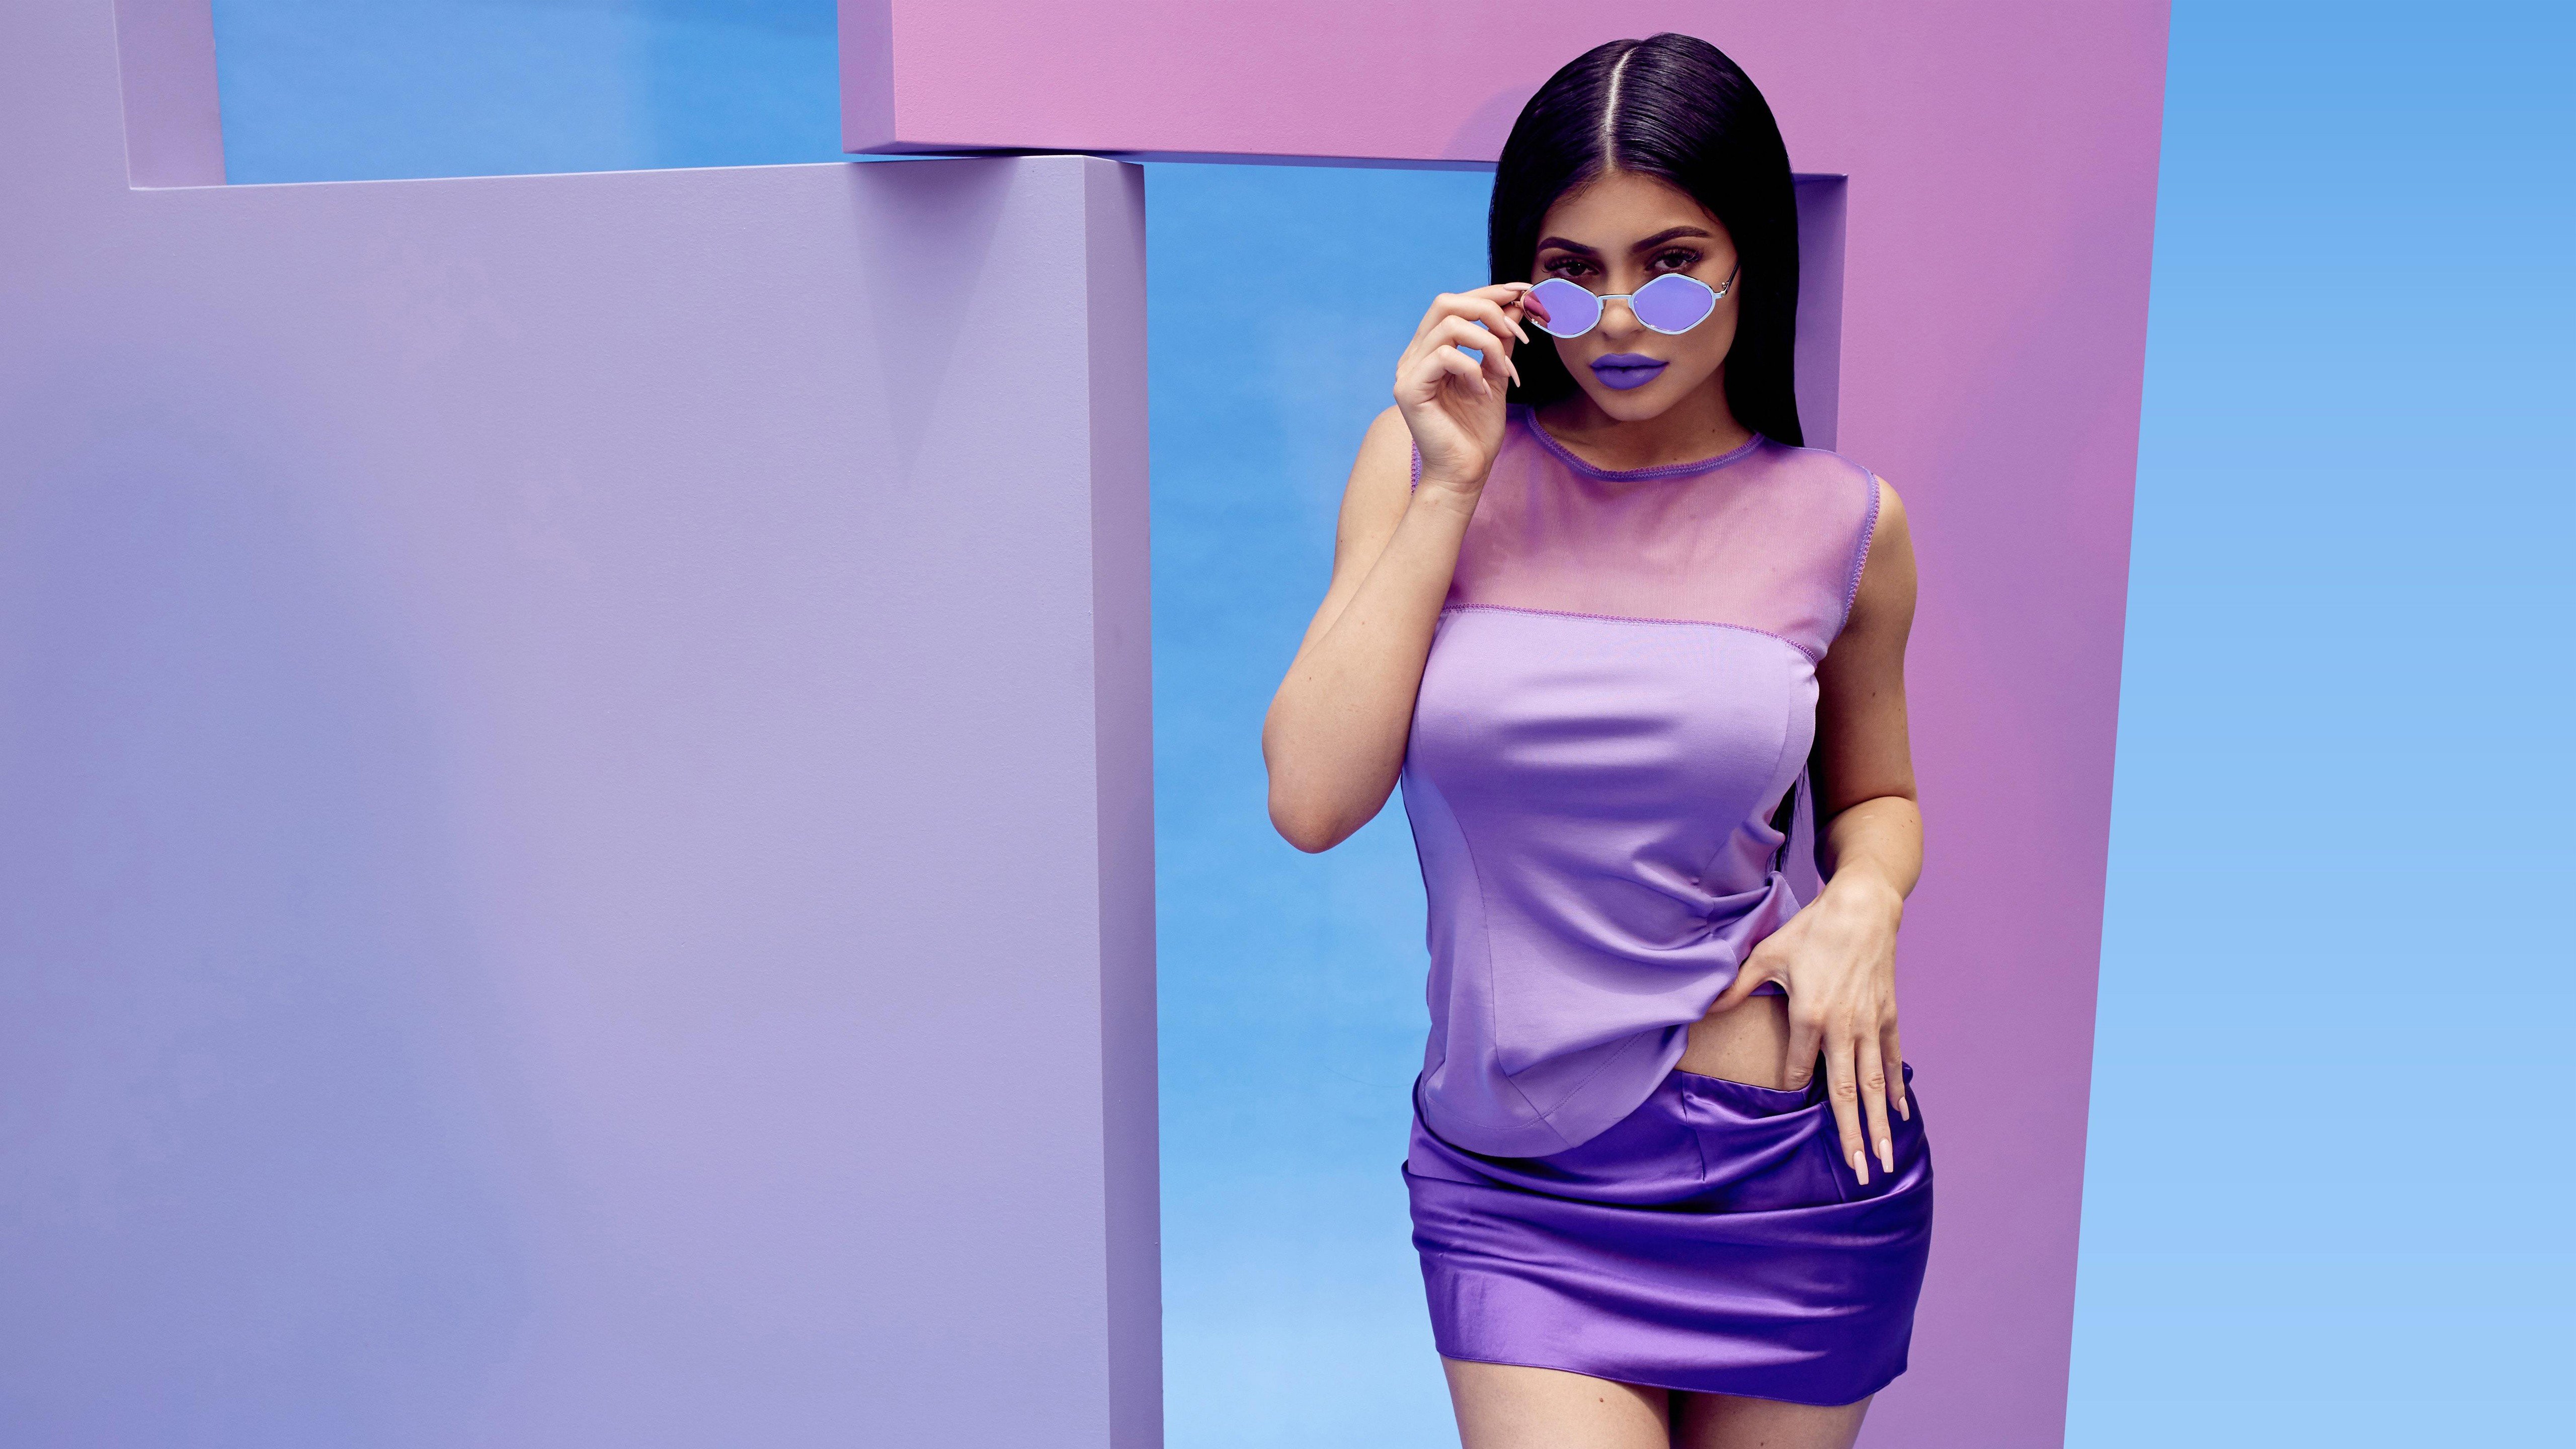 Wallpaper Kylie Jenner Blue and Purple delight